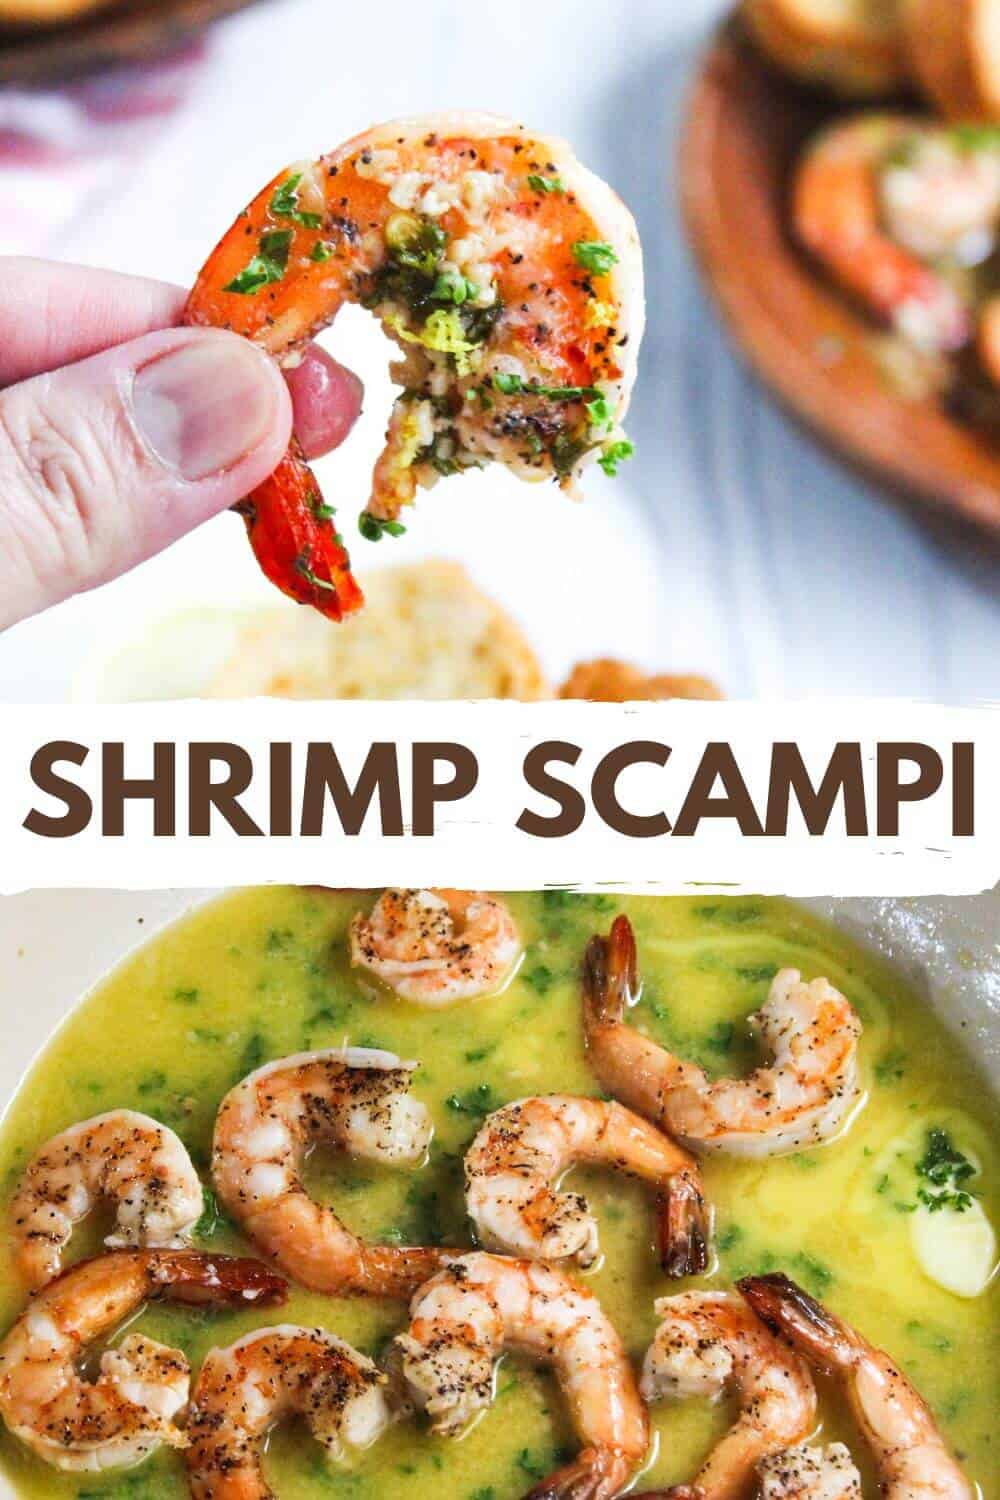 Shrimp scampi with a bread.